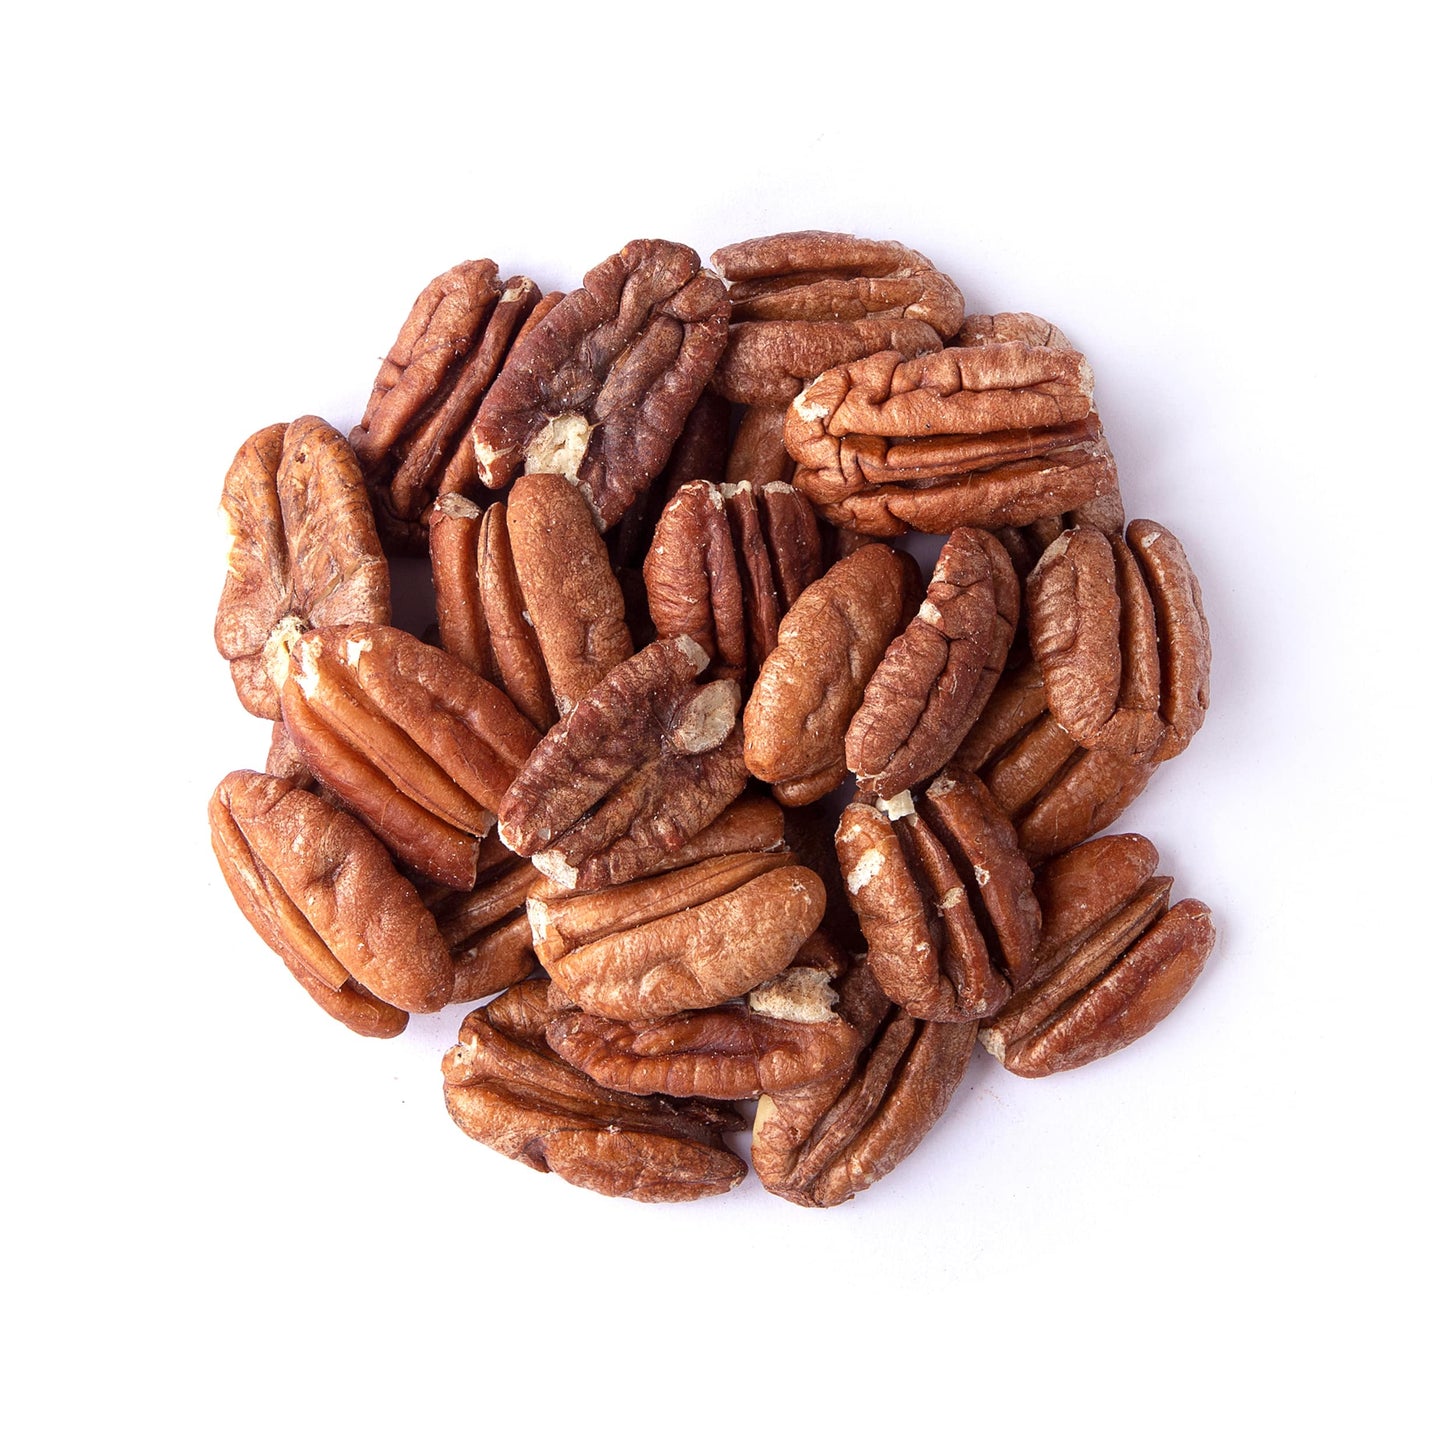 Organic Dry Roasted Pecan Halves – Non-GMO, Unsalted Nuts, Oven Roasted, No Oil Added, Vegan, Kosher, Shelled, Bulk. Good Source of Protein and Fiber. Great Keto-Friendly Snack